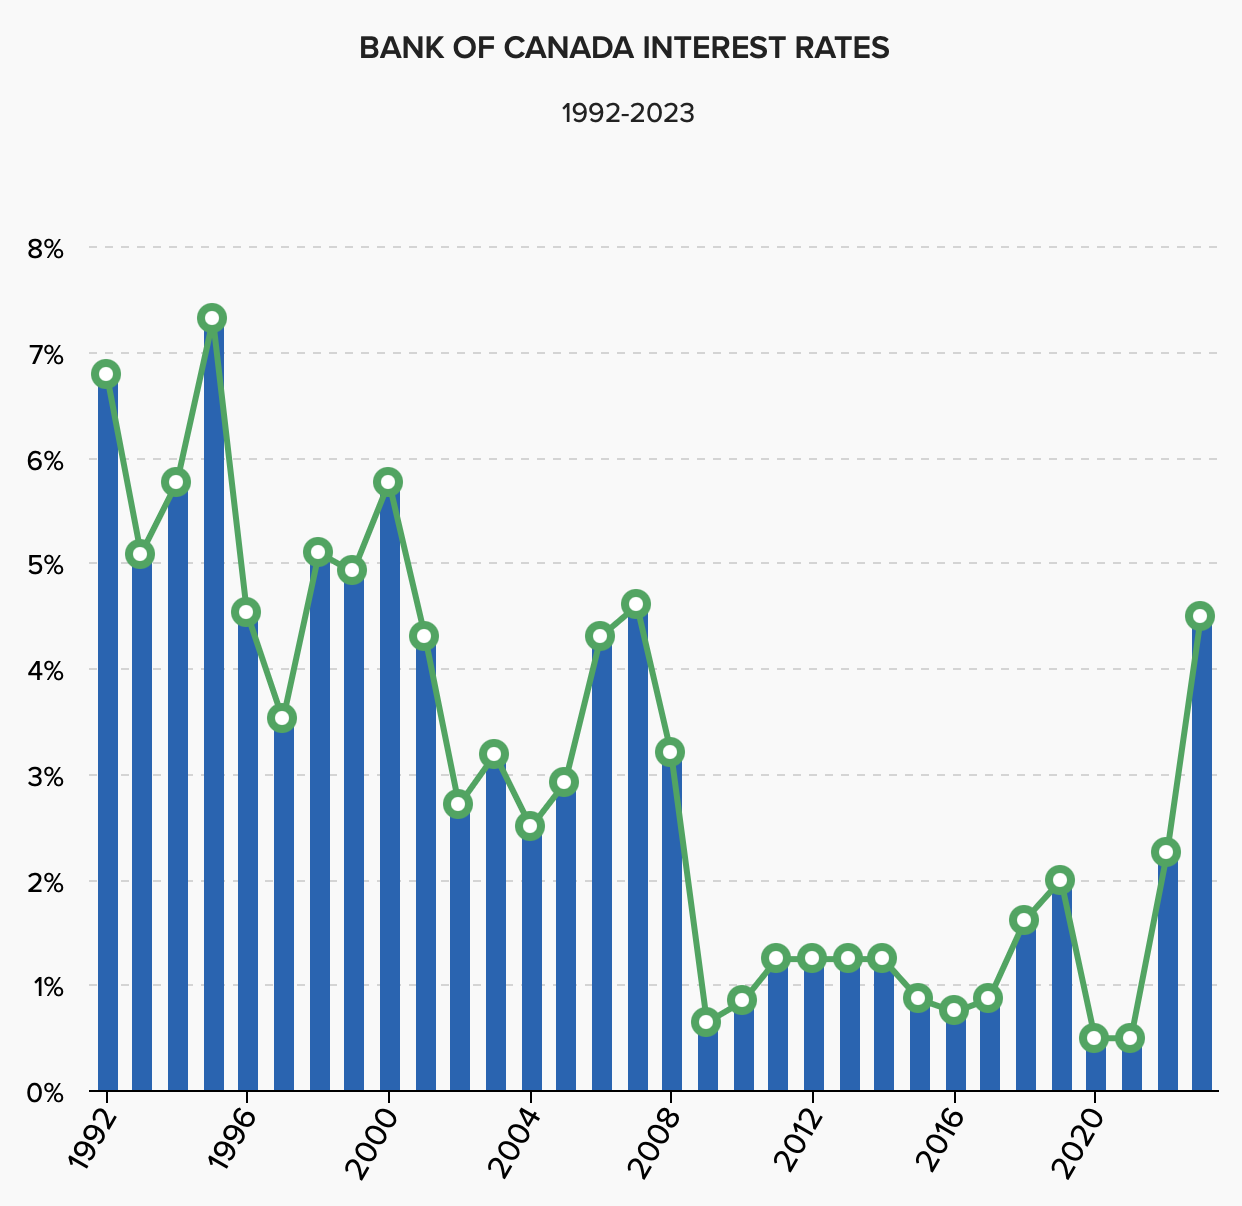 Bank of Canada historical insterest rates